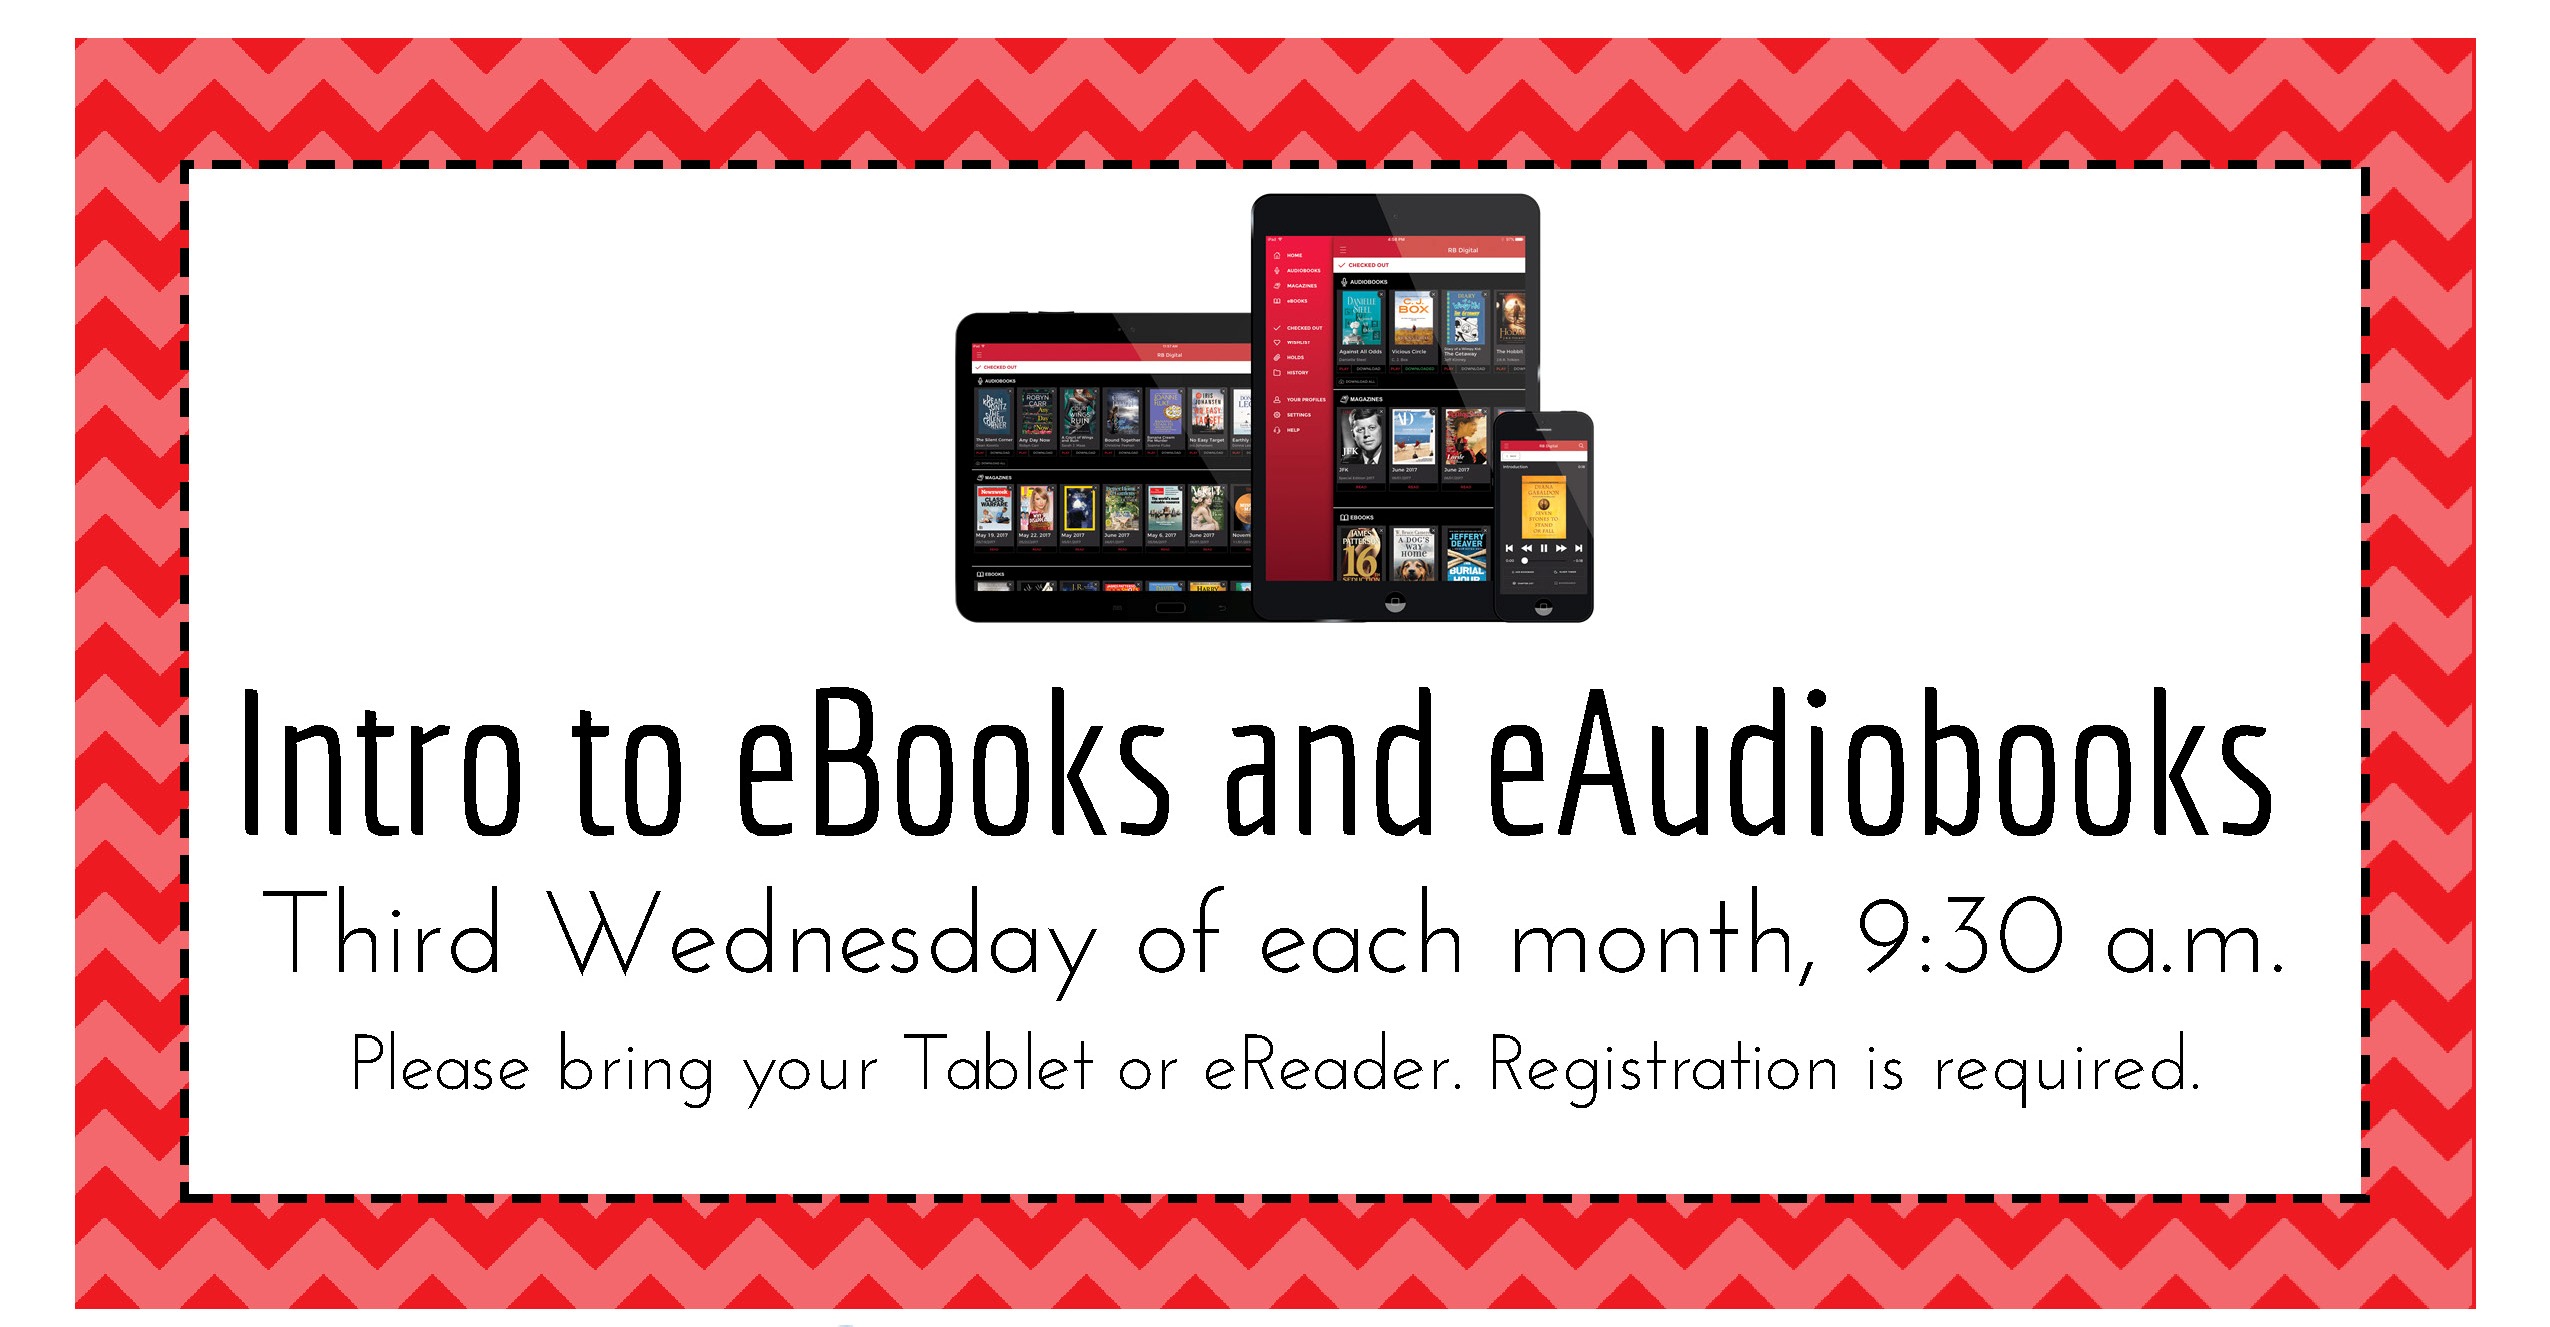 INTRO TO eBOOKS AND eAUDIOBOOKS THIRD WEDNESDAY AT 9:30